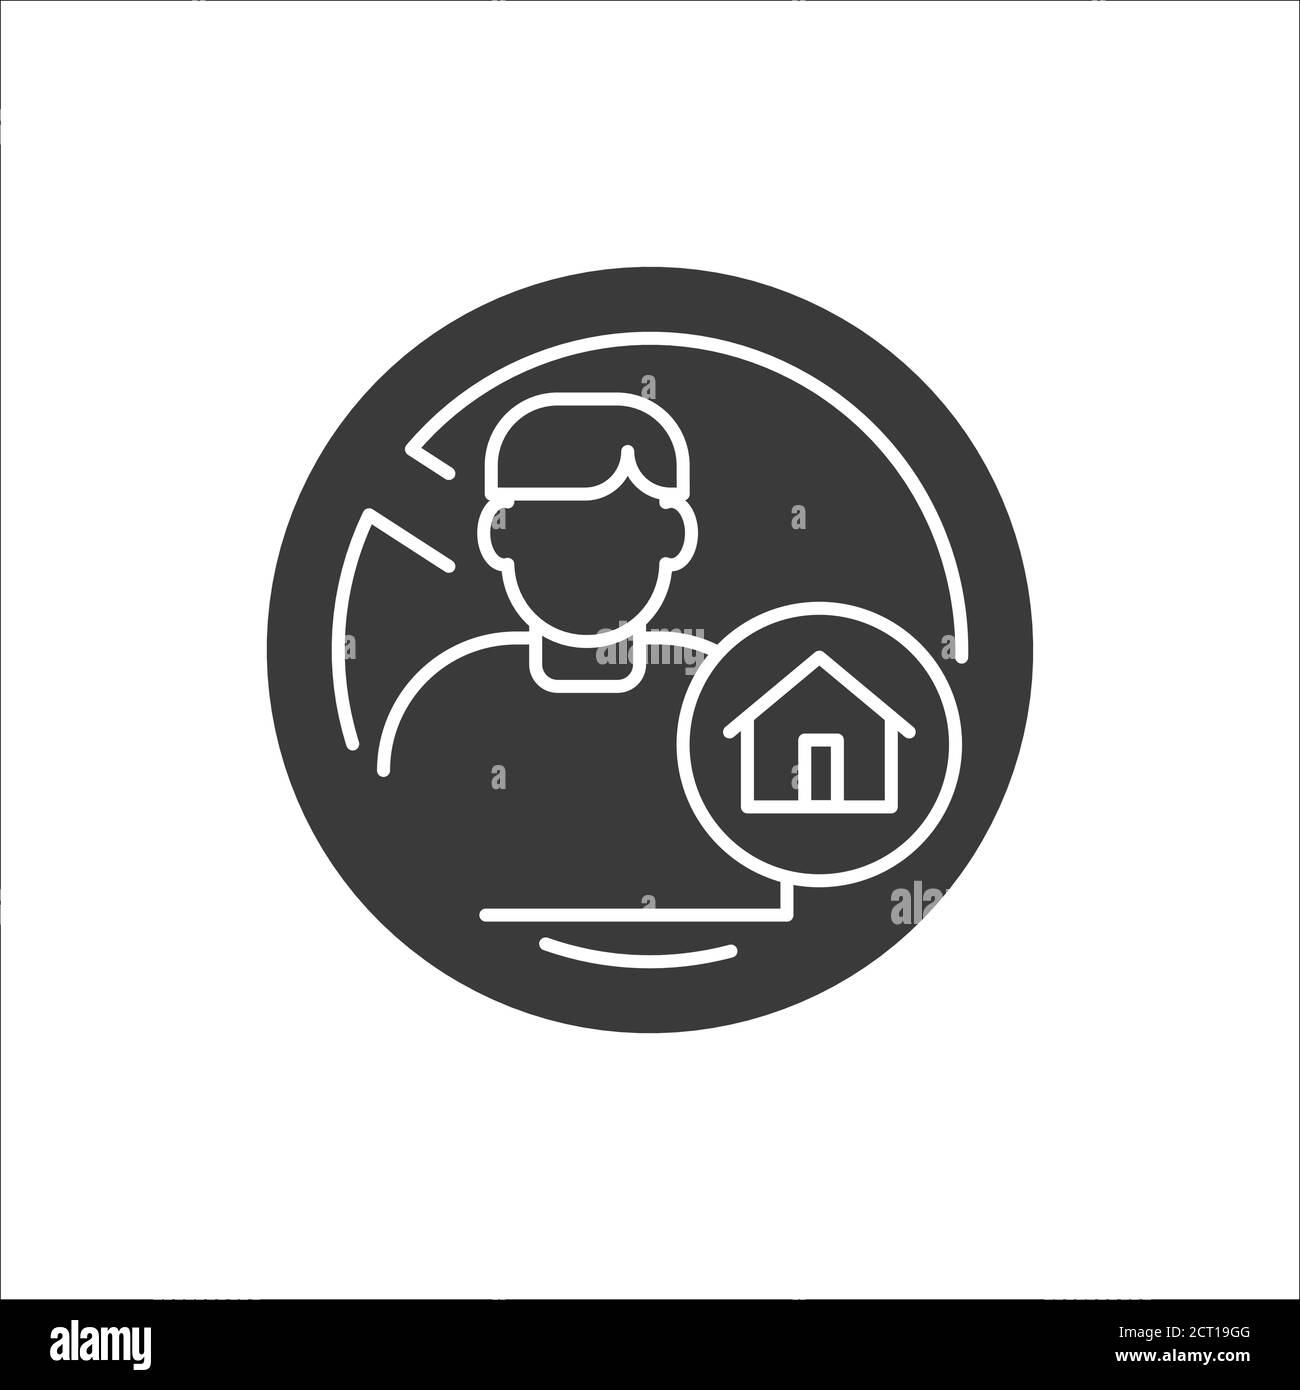 Homeless black glyph icon. Social problem concept. Sign for web page, mobile app, banner, social media. Stock Vector